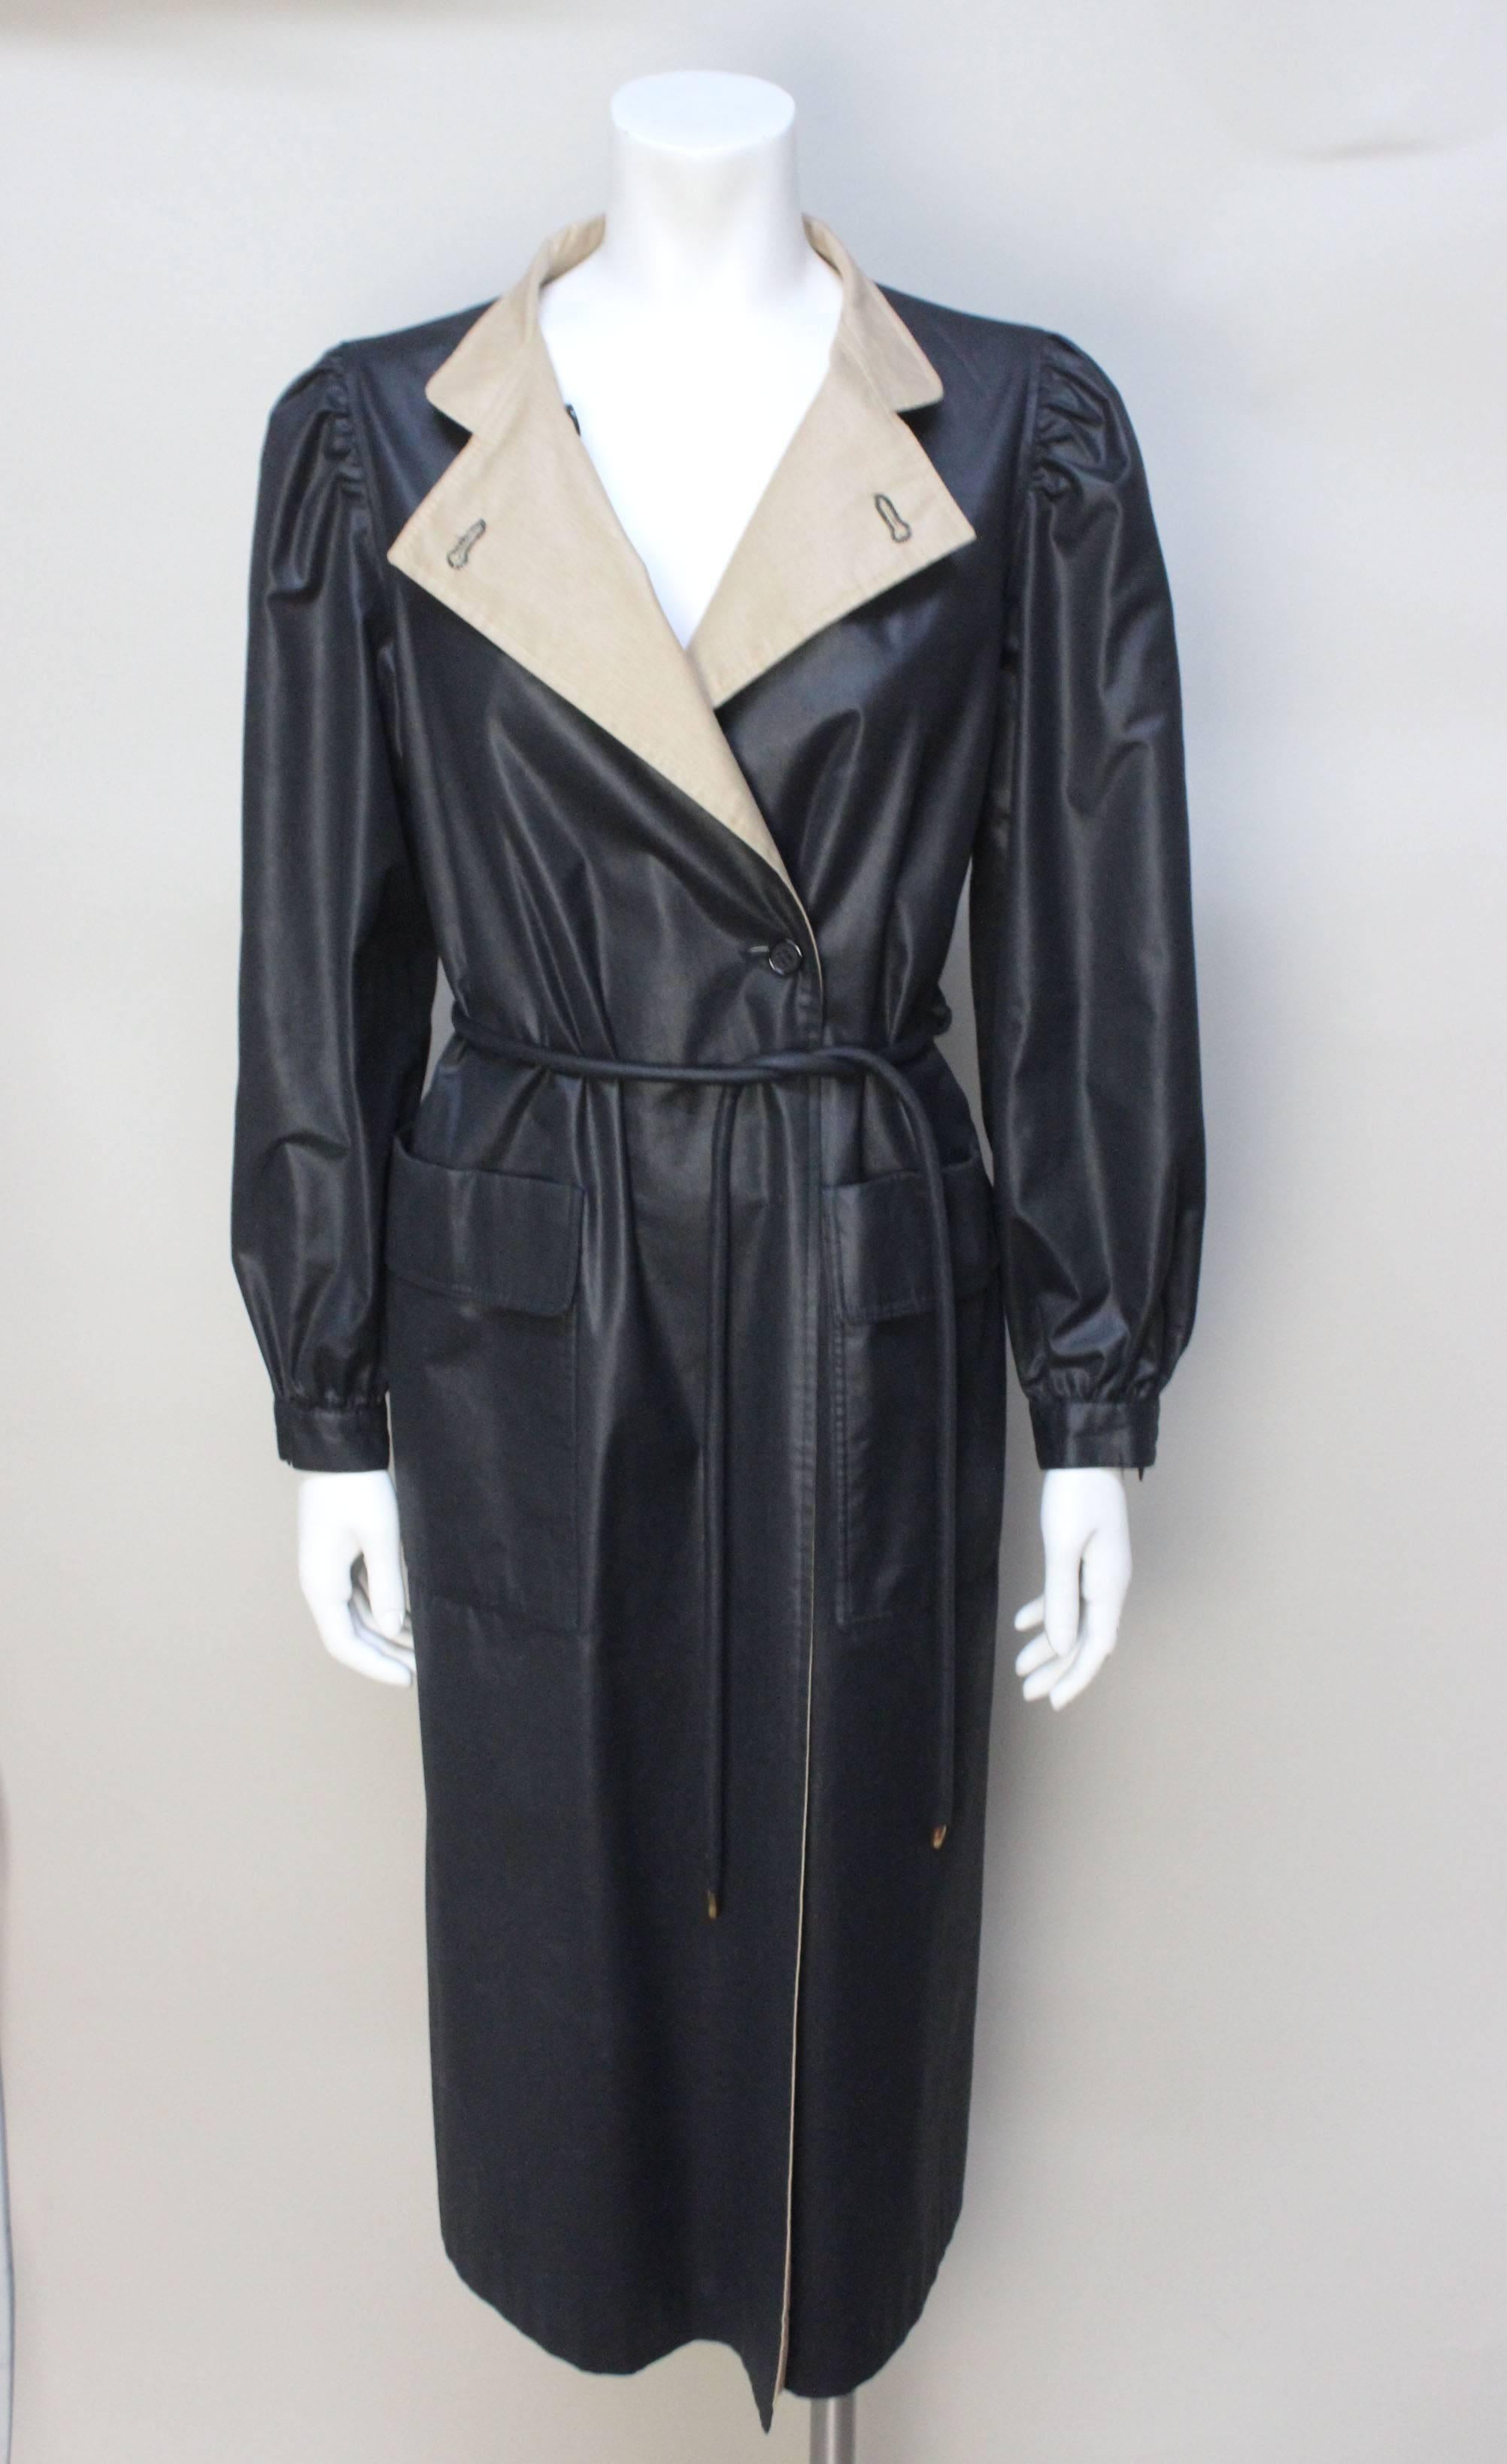 Bonnie Cashin is considered one of the most significant pioneers of American designer sportswear. This stunning jacket is an example of Bonnie Cashin at her finest. This rain jacket, designed for Russ Taylor, is a stunning black jacket with a tie